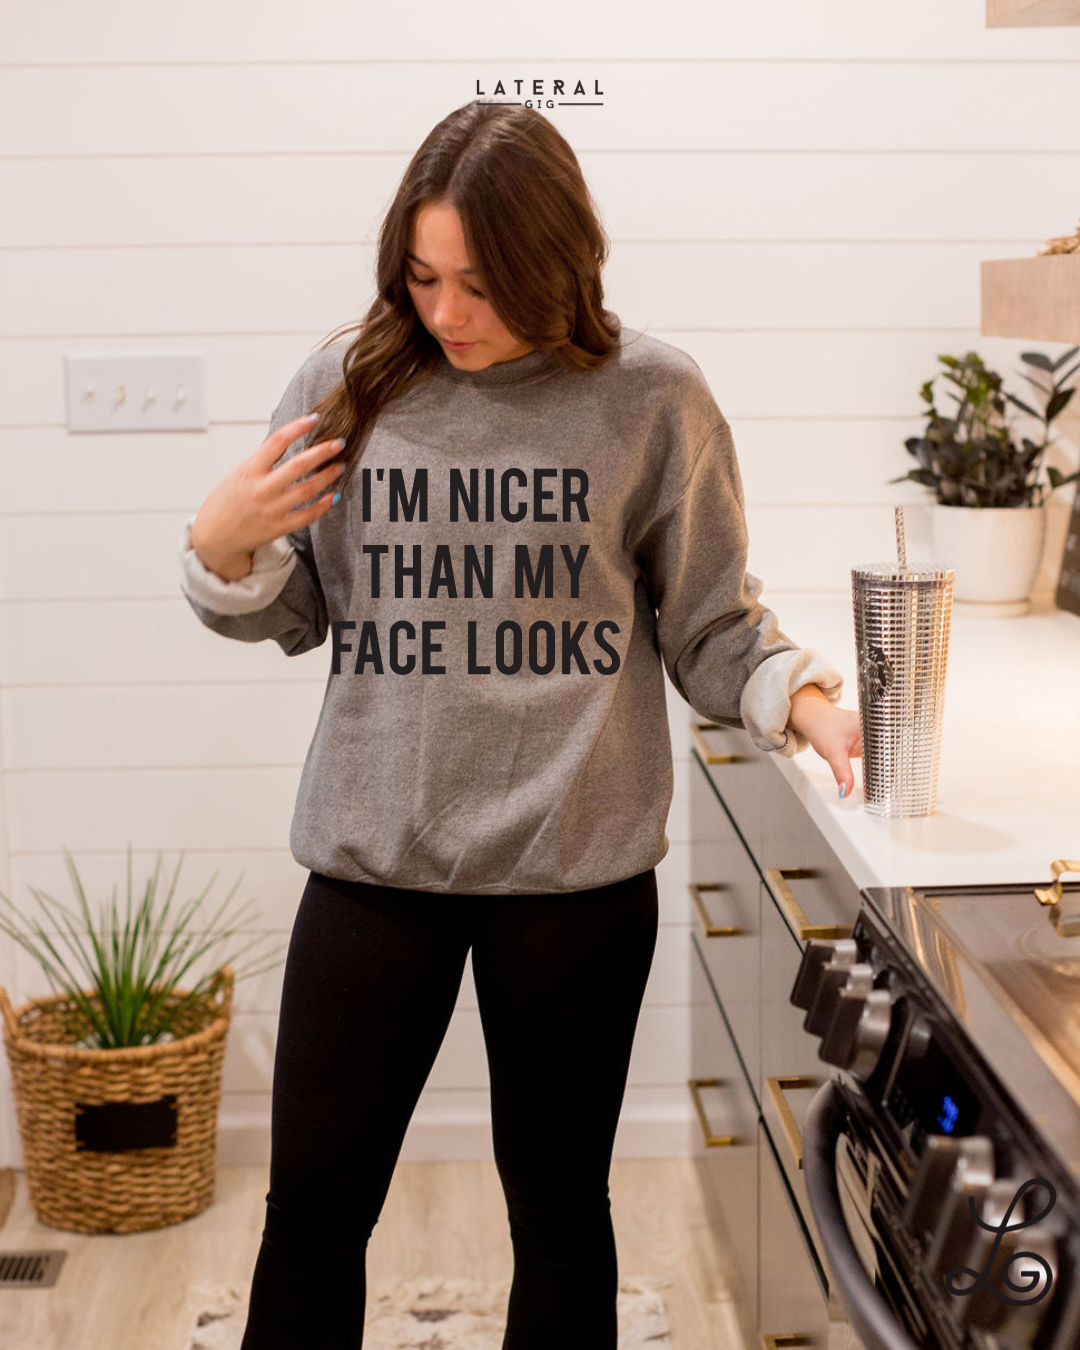 I'm Nicer Than My Face Looks